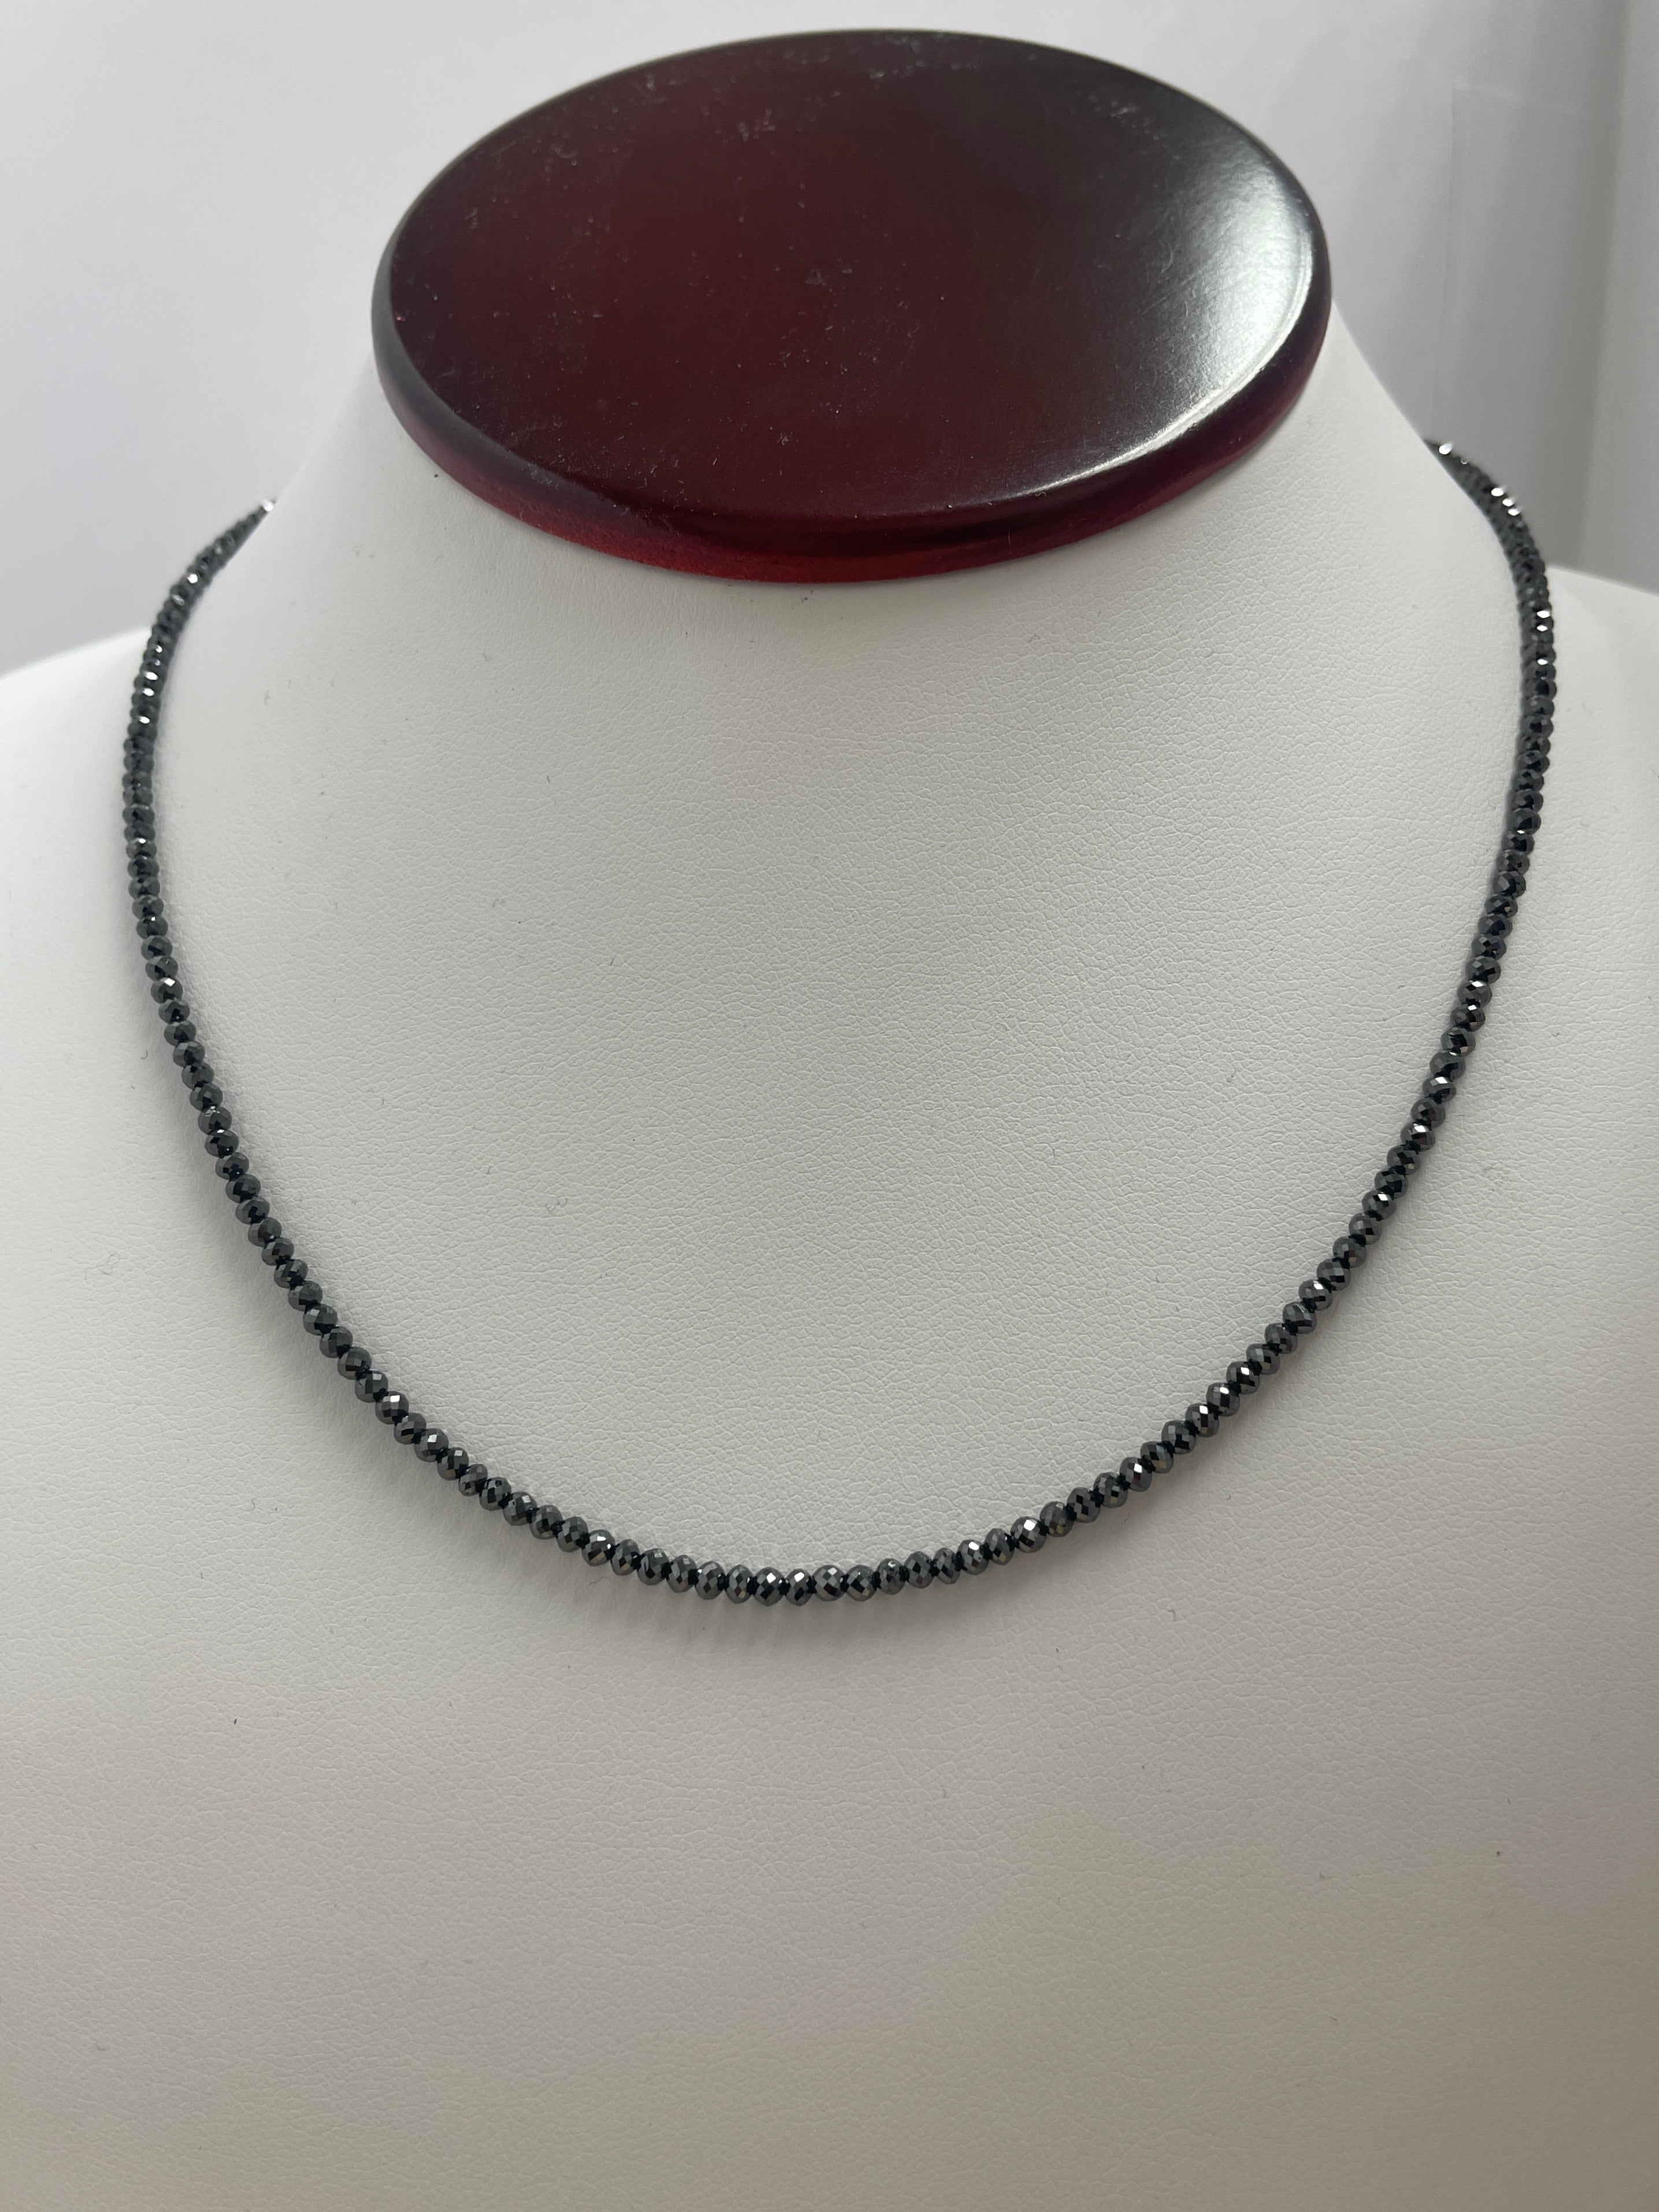 Black Diamond Beads Necklace 17 Inches Made by 18k White Gold